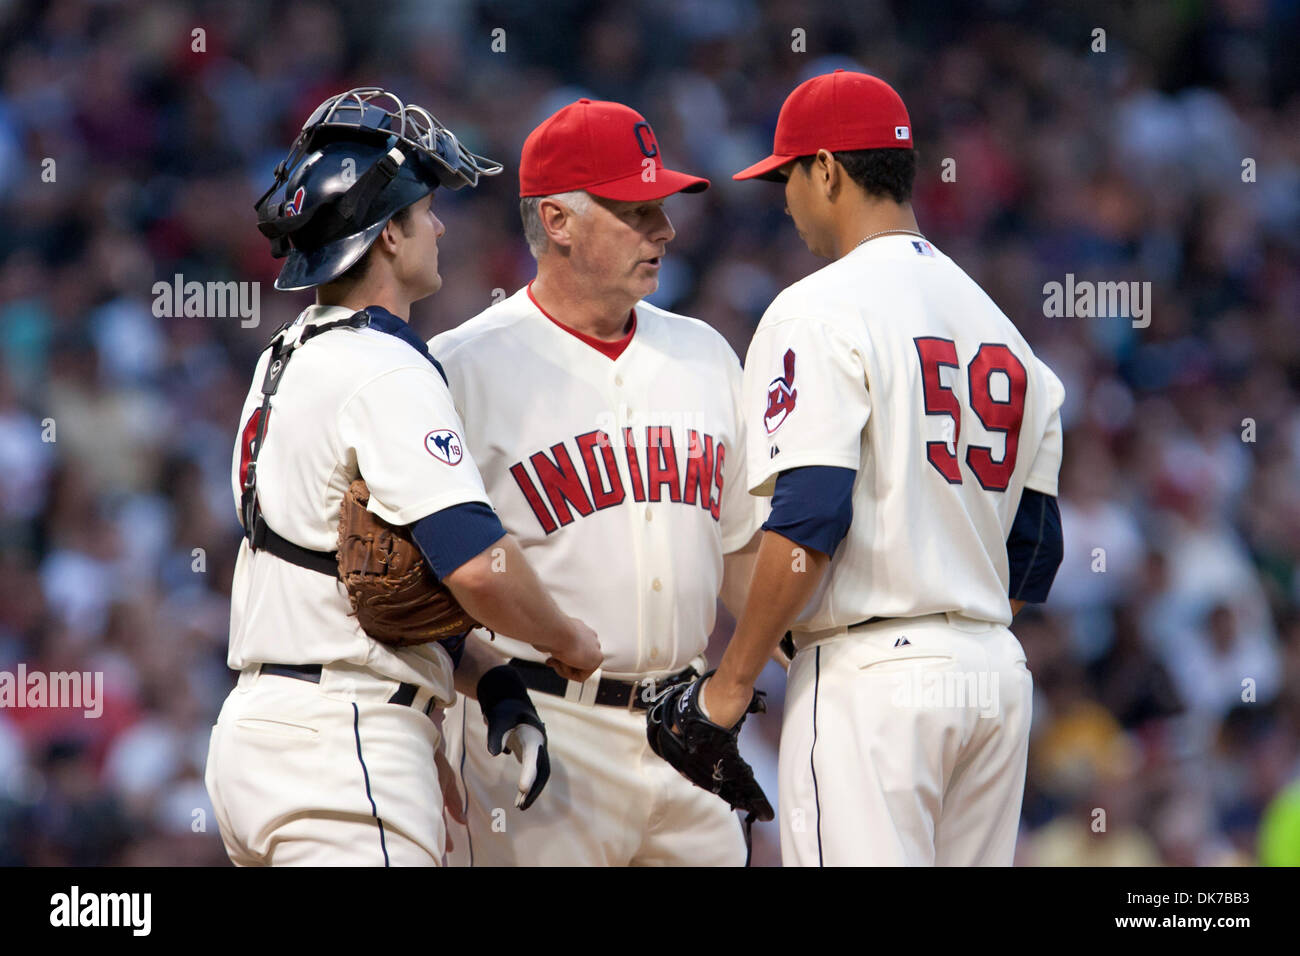 June 18, 2011 - Cleveland, Ohio, U.S - Cleveland pitching coach Tim Belcher (49) meets on the mound with catcher Lou Marson (7) and starting pitcher Carlos Carrasco (59) during the sixth inning against Pittsburgh.  The Cleveland Indians defeated the Pittsburgh Pirates 5-1 at Progressive Field in Cleveland, Ohio. (Credit Image: © Frank Jansky/Southcreek Global/ZUMAPRESS.com) Stock Photo